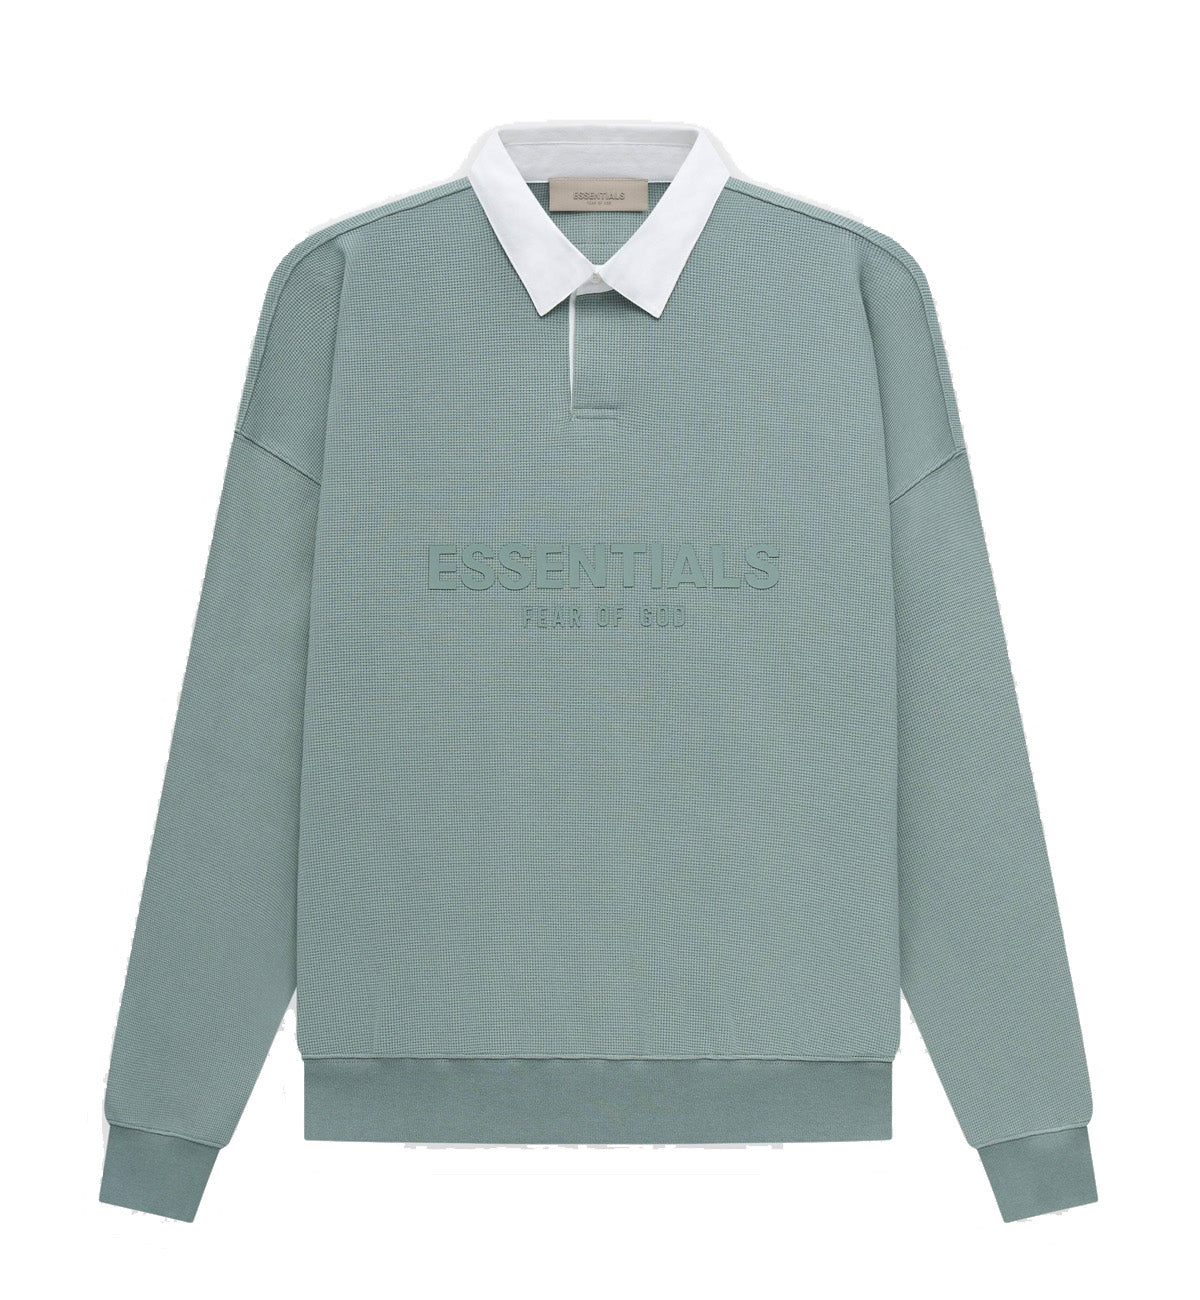 Fear of God Essential SS23 Long Sleeve Polo Shirt (Sycamore)